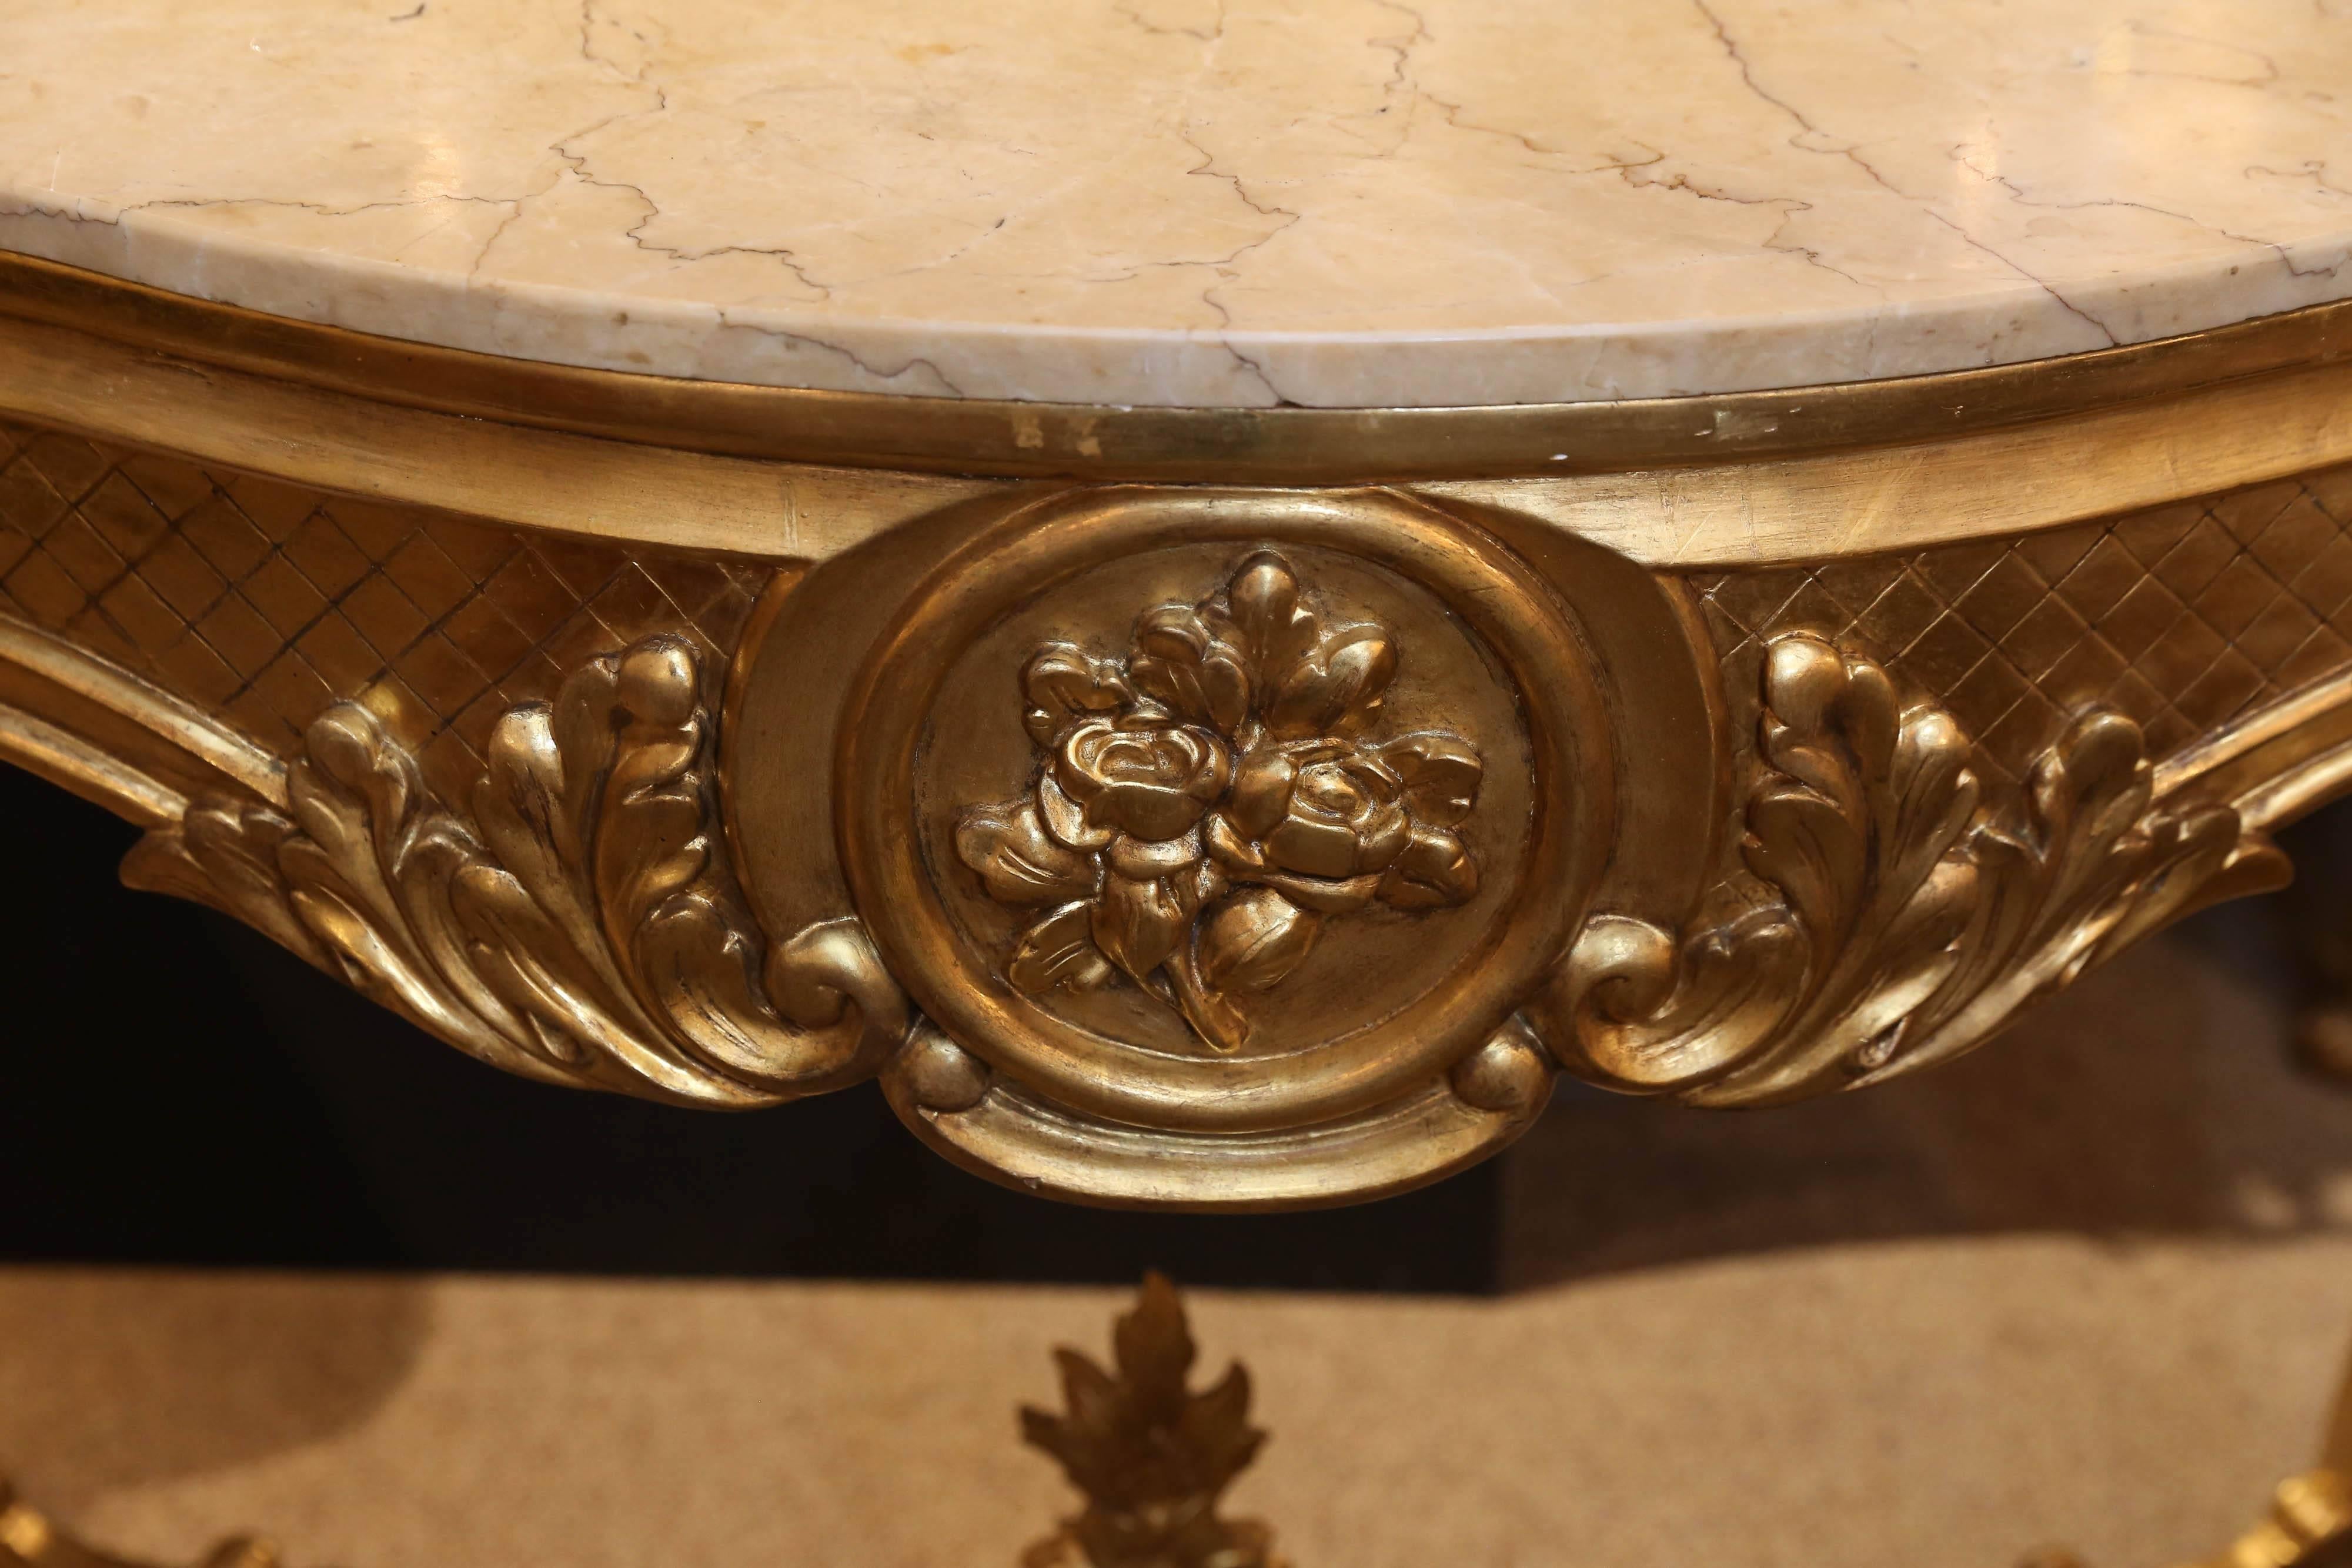 giltwood French Louis XV style console, with cream marble top
An X-form stretcher connects the legs at the bottom of this 
Piece and a floral carved finial decorates the center
Floral motif is carved within carved circular forms on the
Center